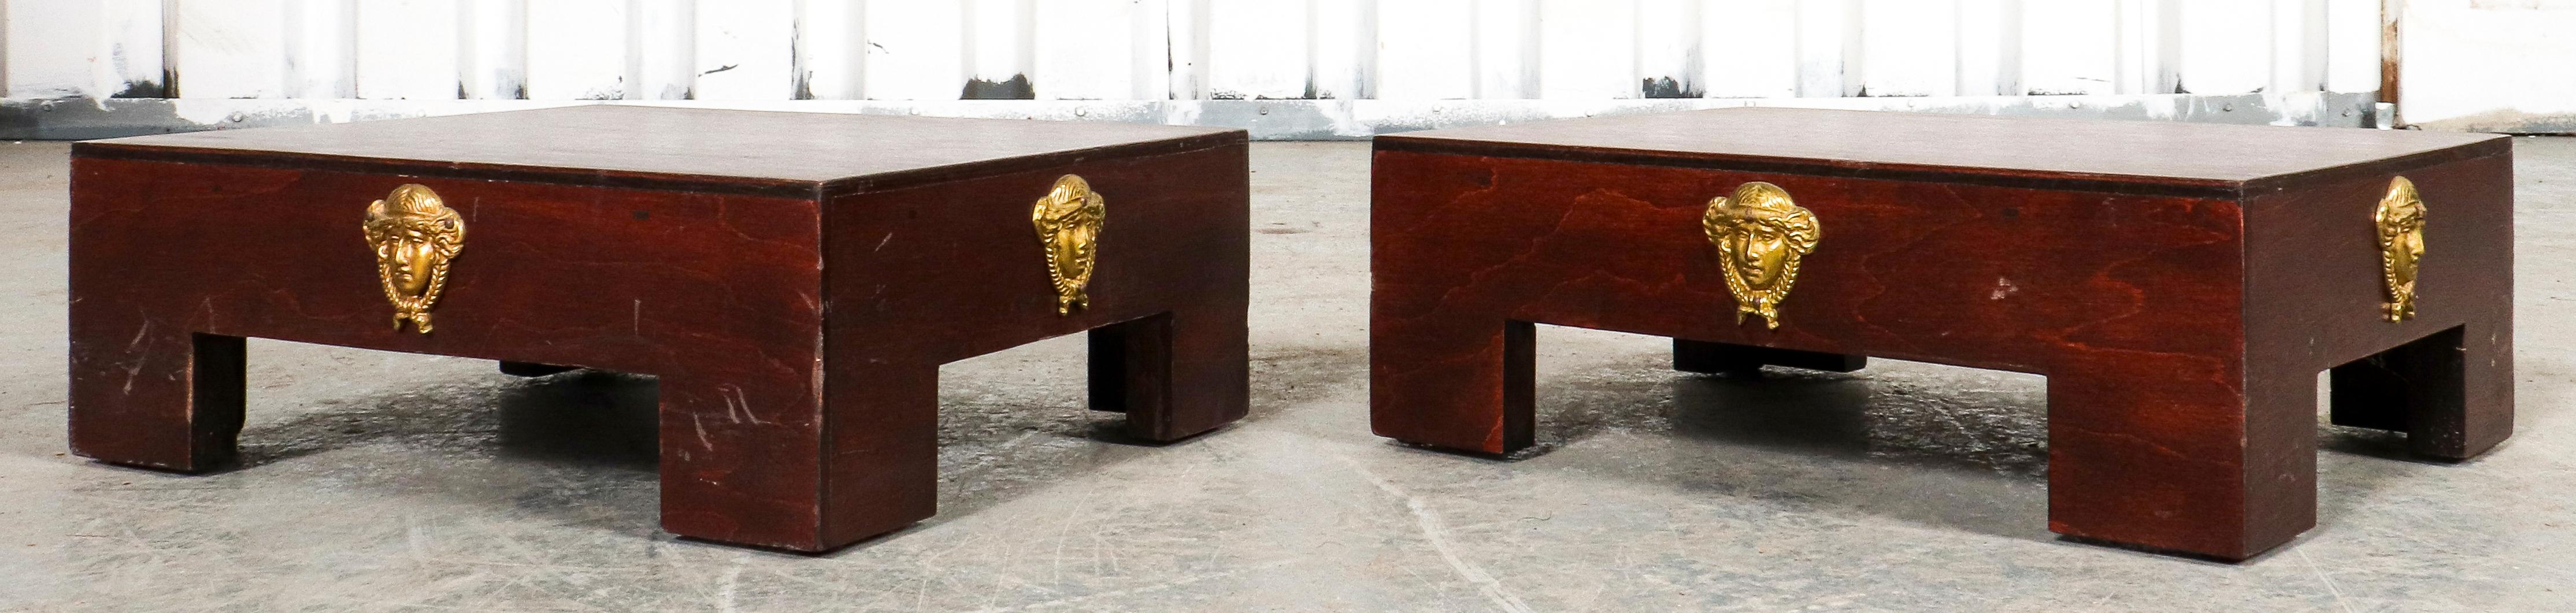 Empire Revival Diminutive Pedestals, Pair In Good Condition For Sale In New York, NY